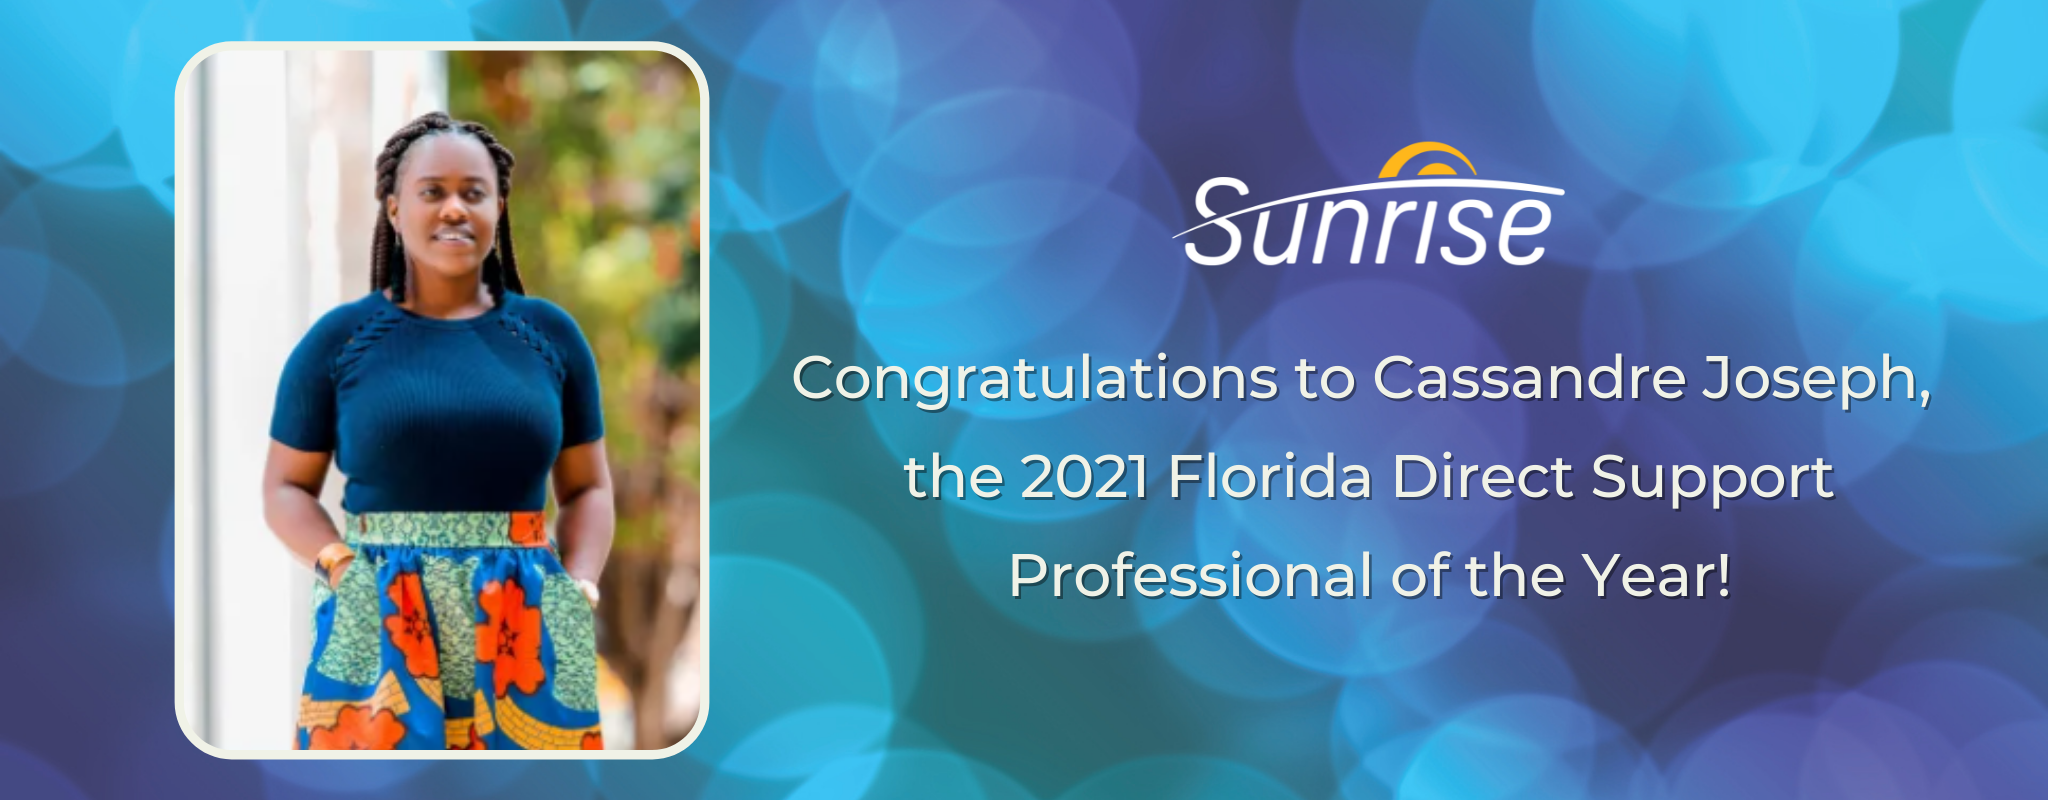 Congratulations to Cassandre Joseph, the 2021 Florida Direct Support Professional of the Year!